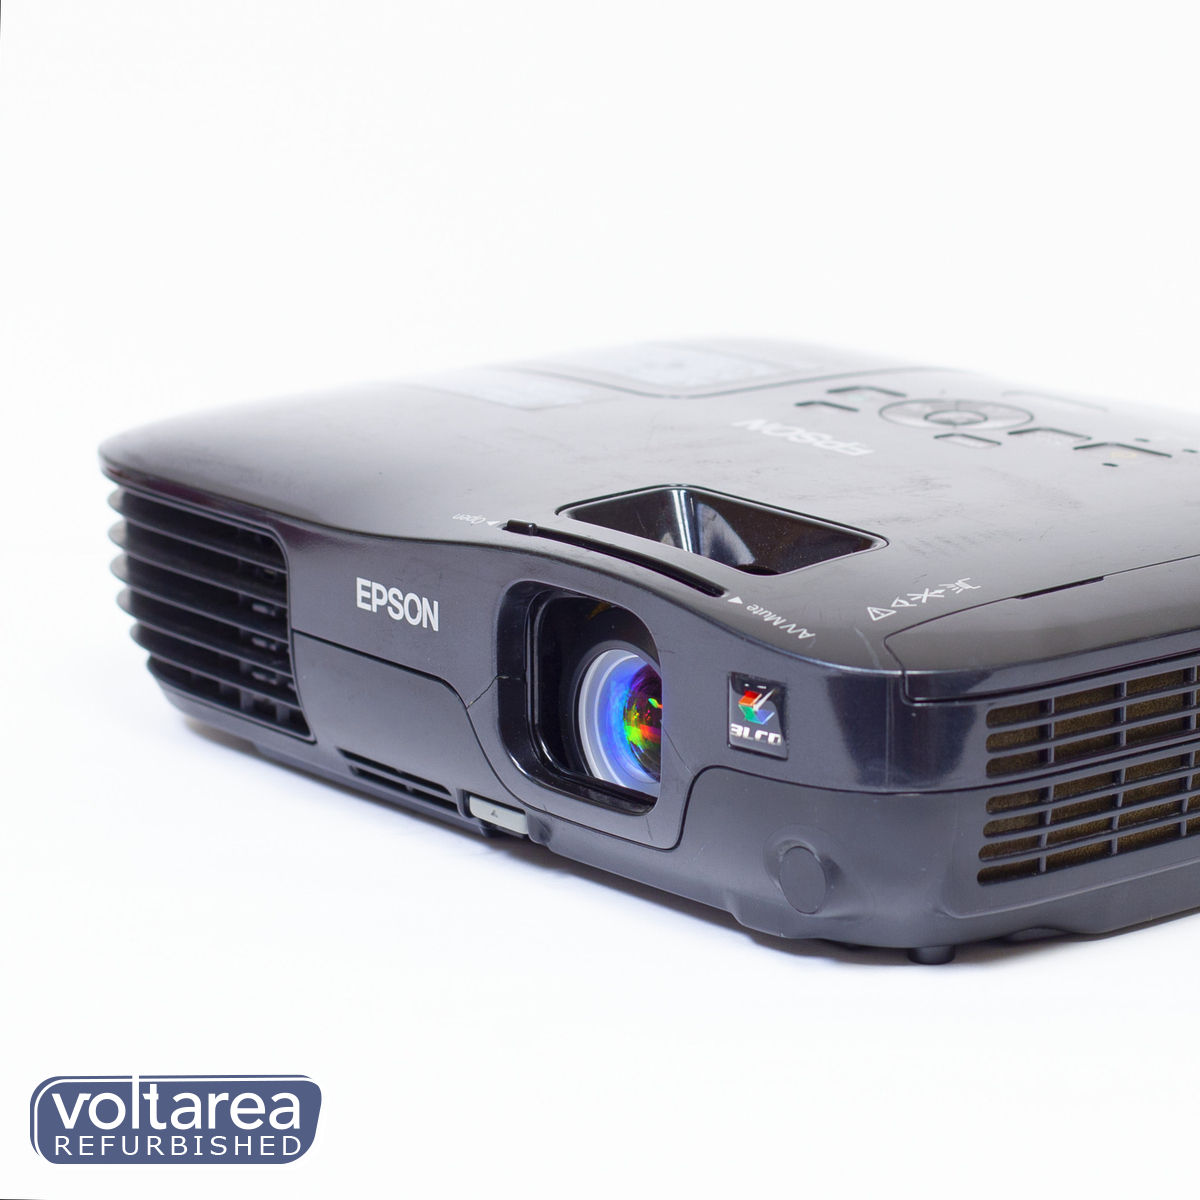 Epson ex51 Normal Throw Projector [Refurbished]